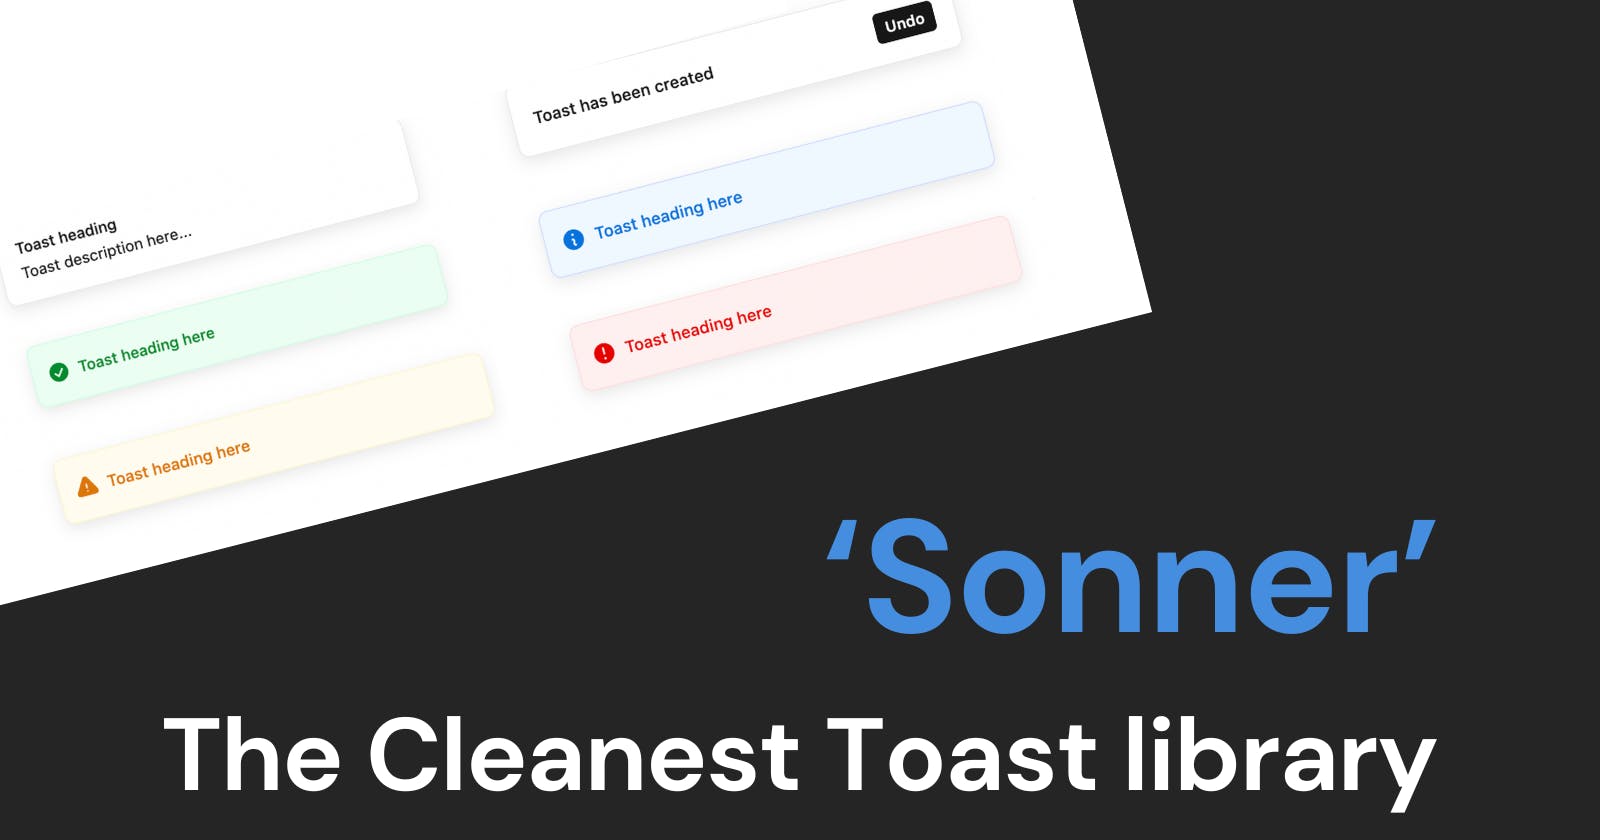 This is the cleanest Toast library